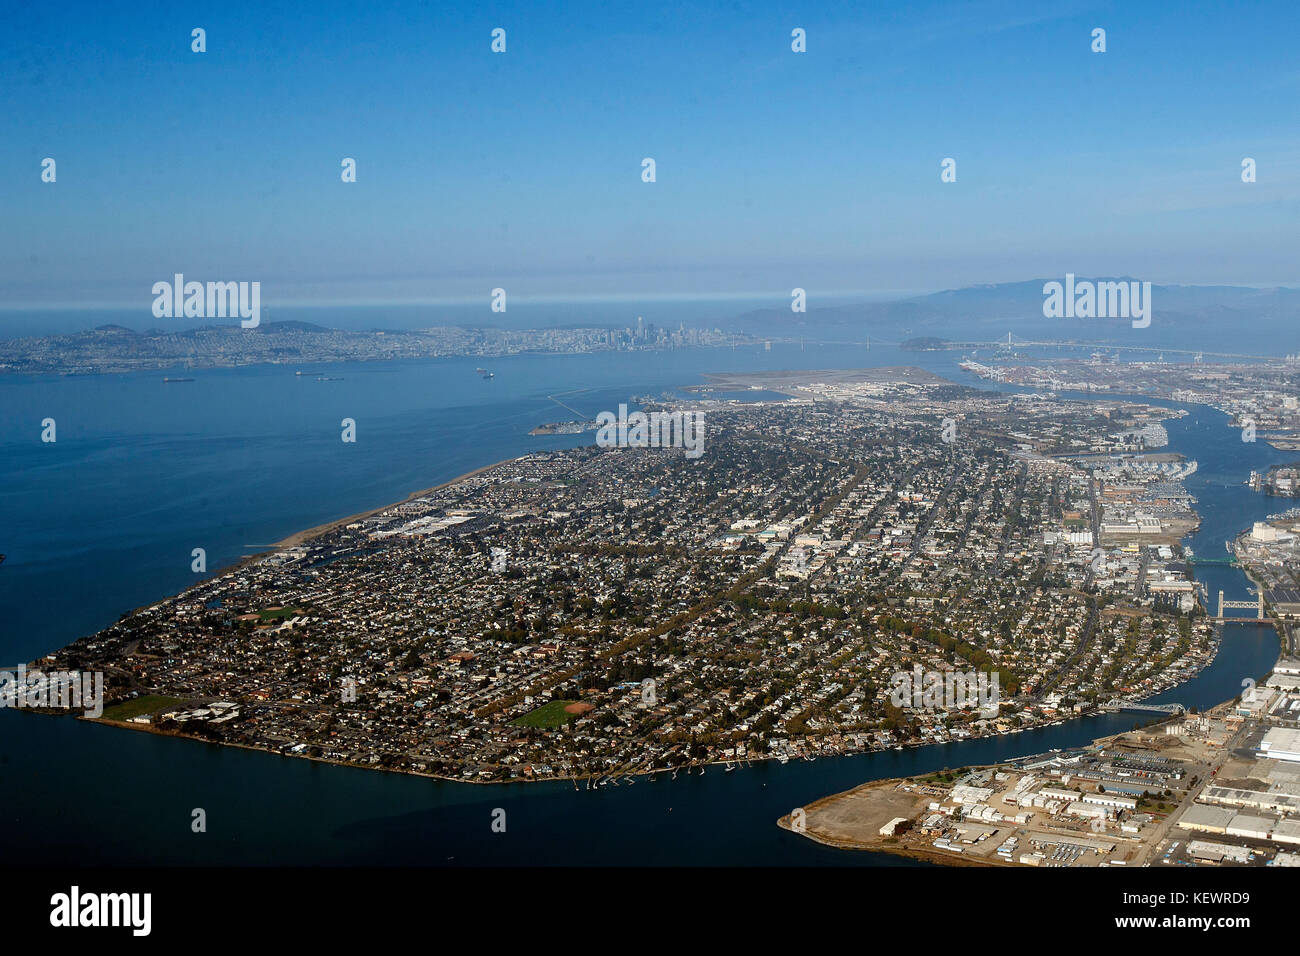 Aerial View of Alameda, California, United States of America Stock Photo